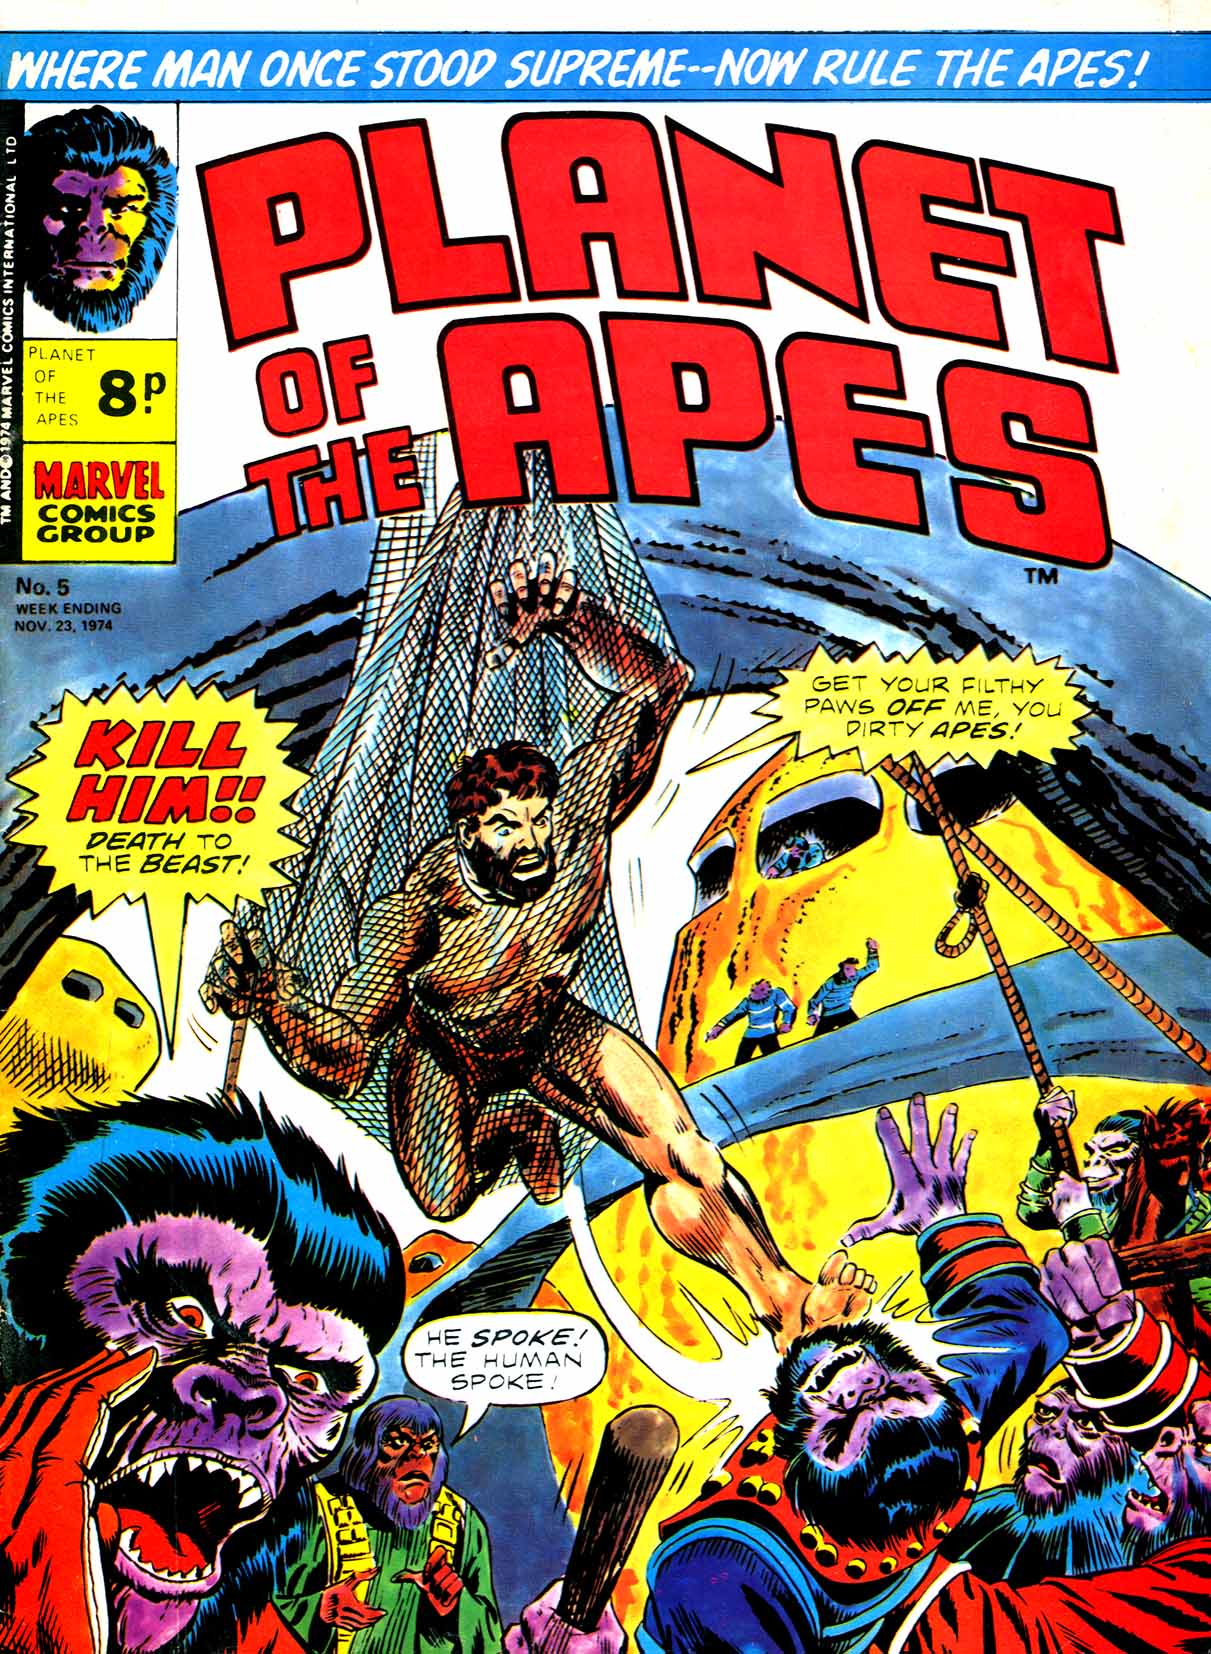 Is Planet of the Apes 5 released a planet ship is a conquering